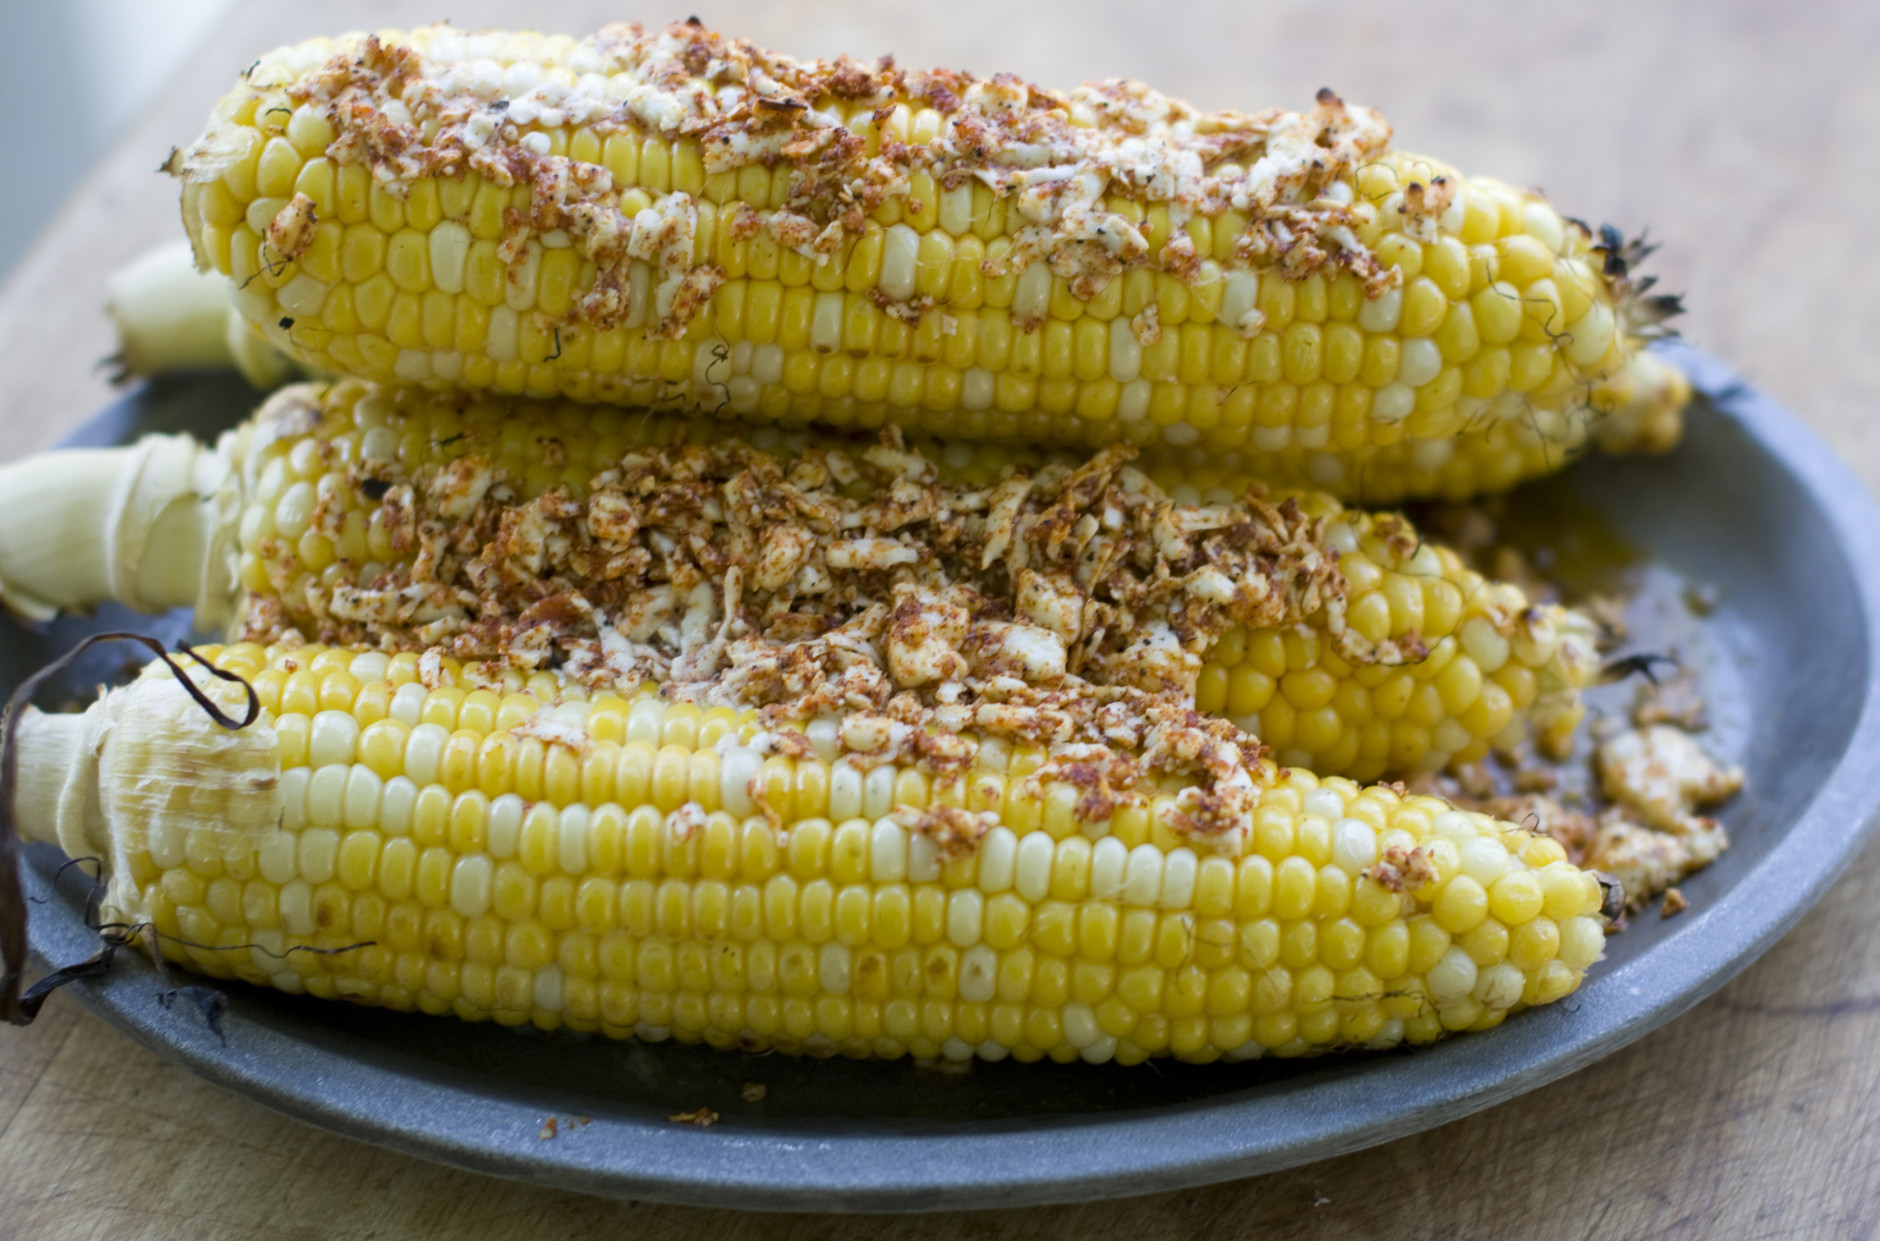 This July 15, 2013 photo shows grilled corn with queso fresco in Concord, N.H. (AP Photo/Matthew Mead)